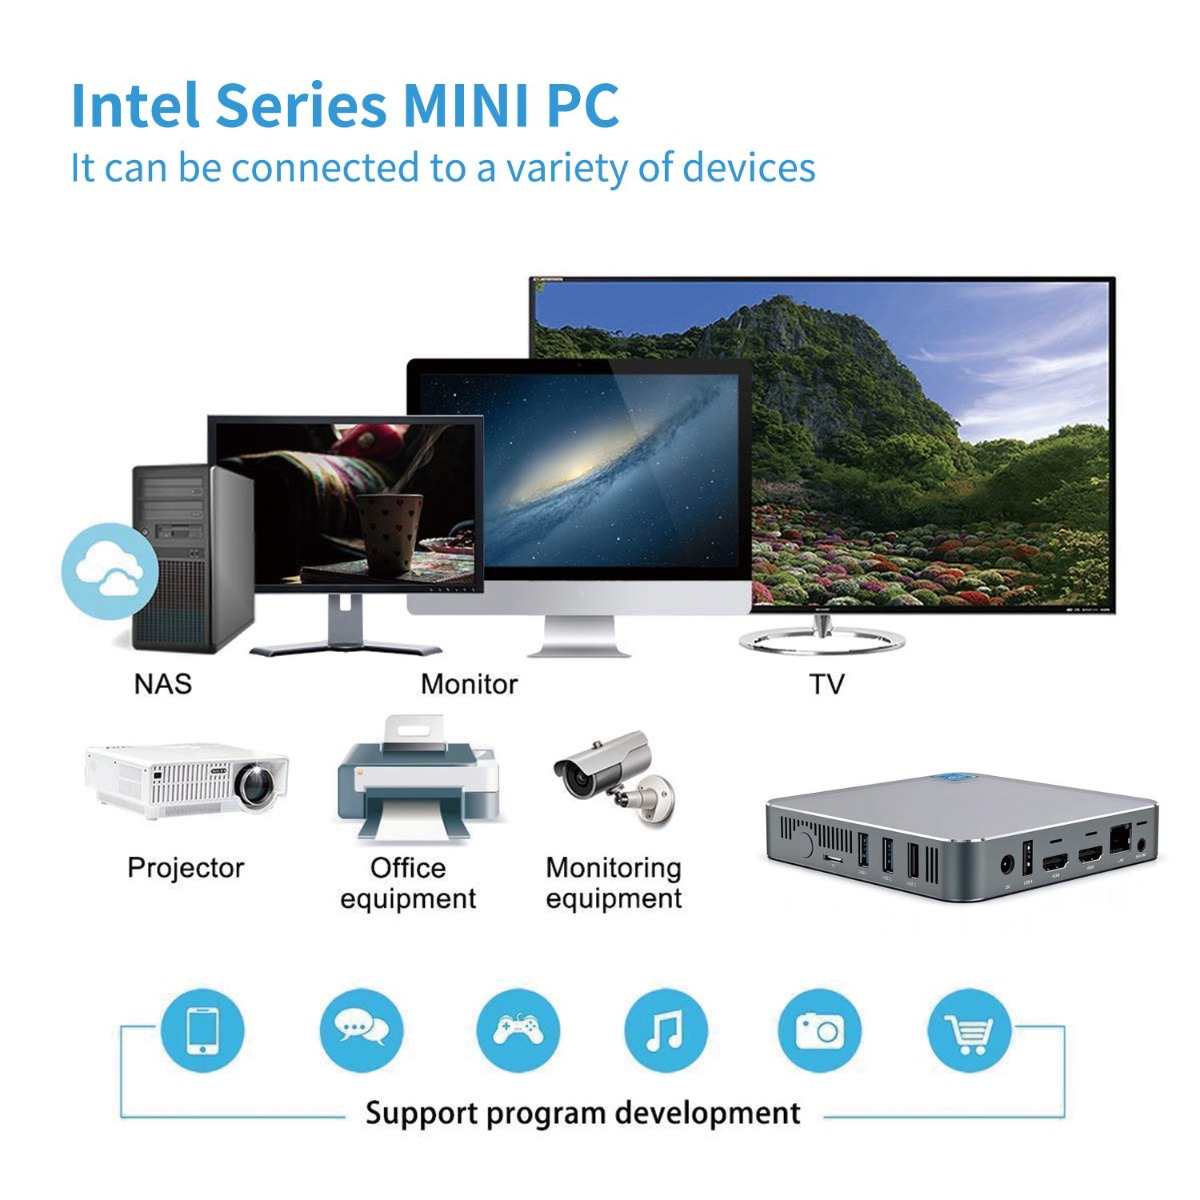 Ultra Mini PC GK7 | Intel Series MINI PC It can be connected to a variety of devices NAS	Monitor HBlEk Office	Monitoring Projector equipment	equipment Support program development